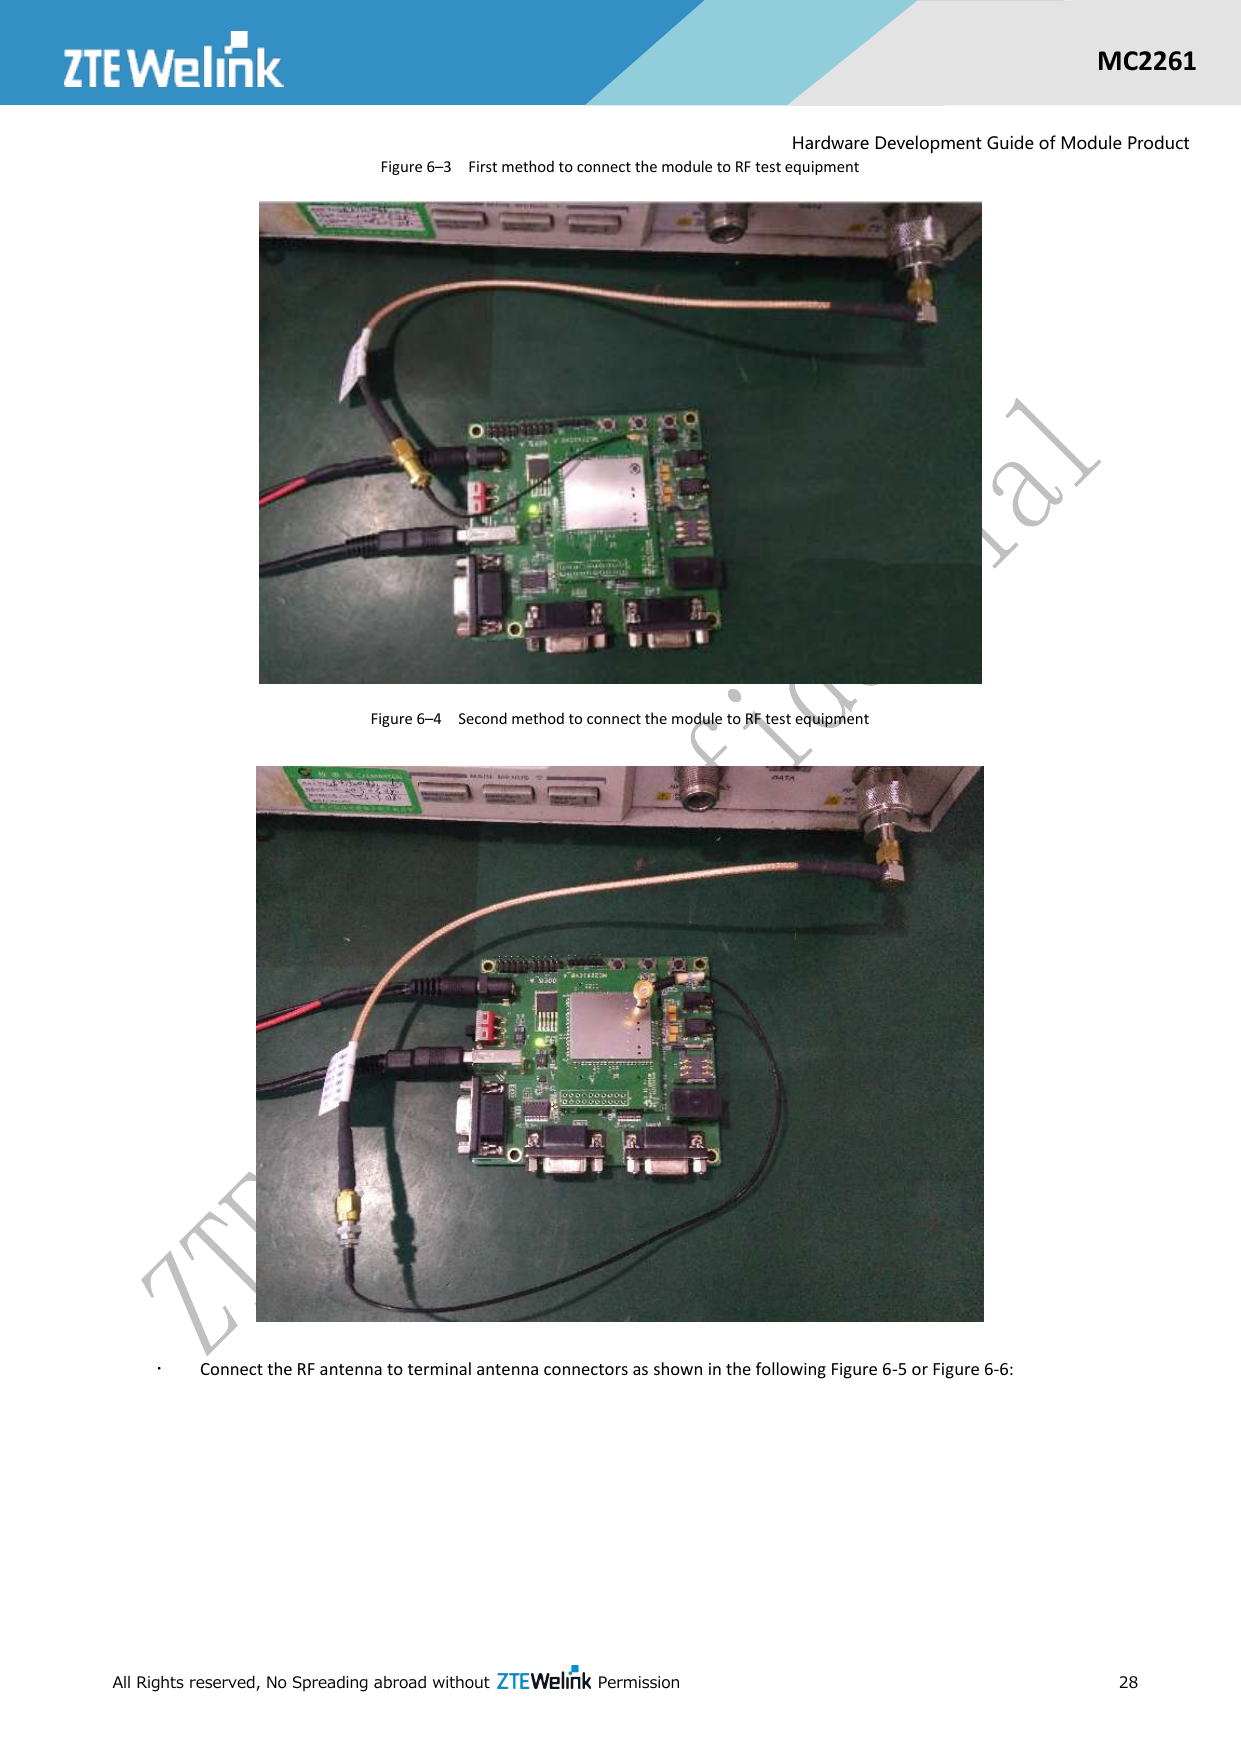  All Rights reserved, No Spreading abroad without    Permission      28  MC2261  Hardware Development Guide of Module Product Figure 6–3  First method to connect the module to RF test equipment  Figure 6–4  Second method to connect the module to RF test equipment   Connect the RF antenna to terminal antenna connectors as shown in the following Figure 6-5 or Figure 6-6:    